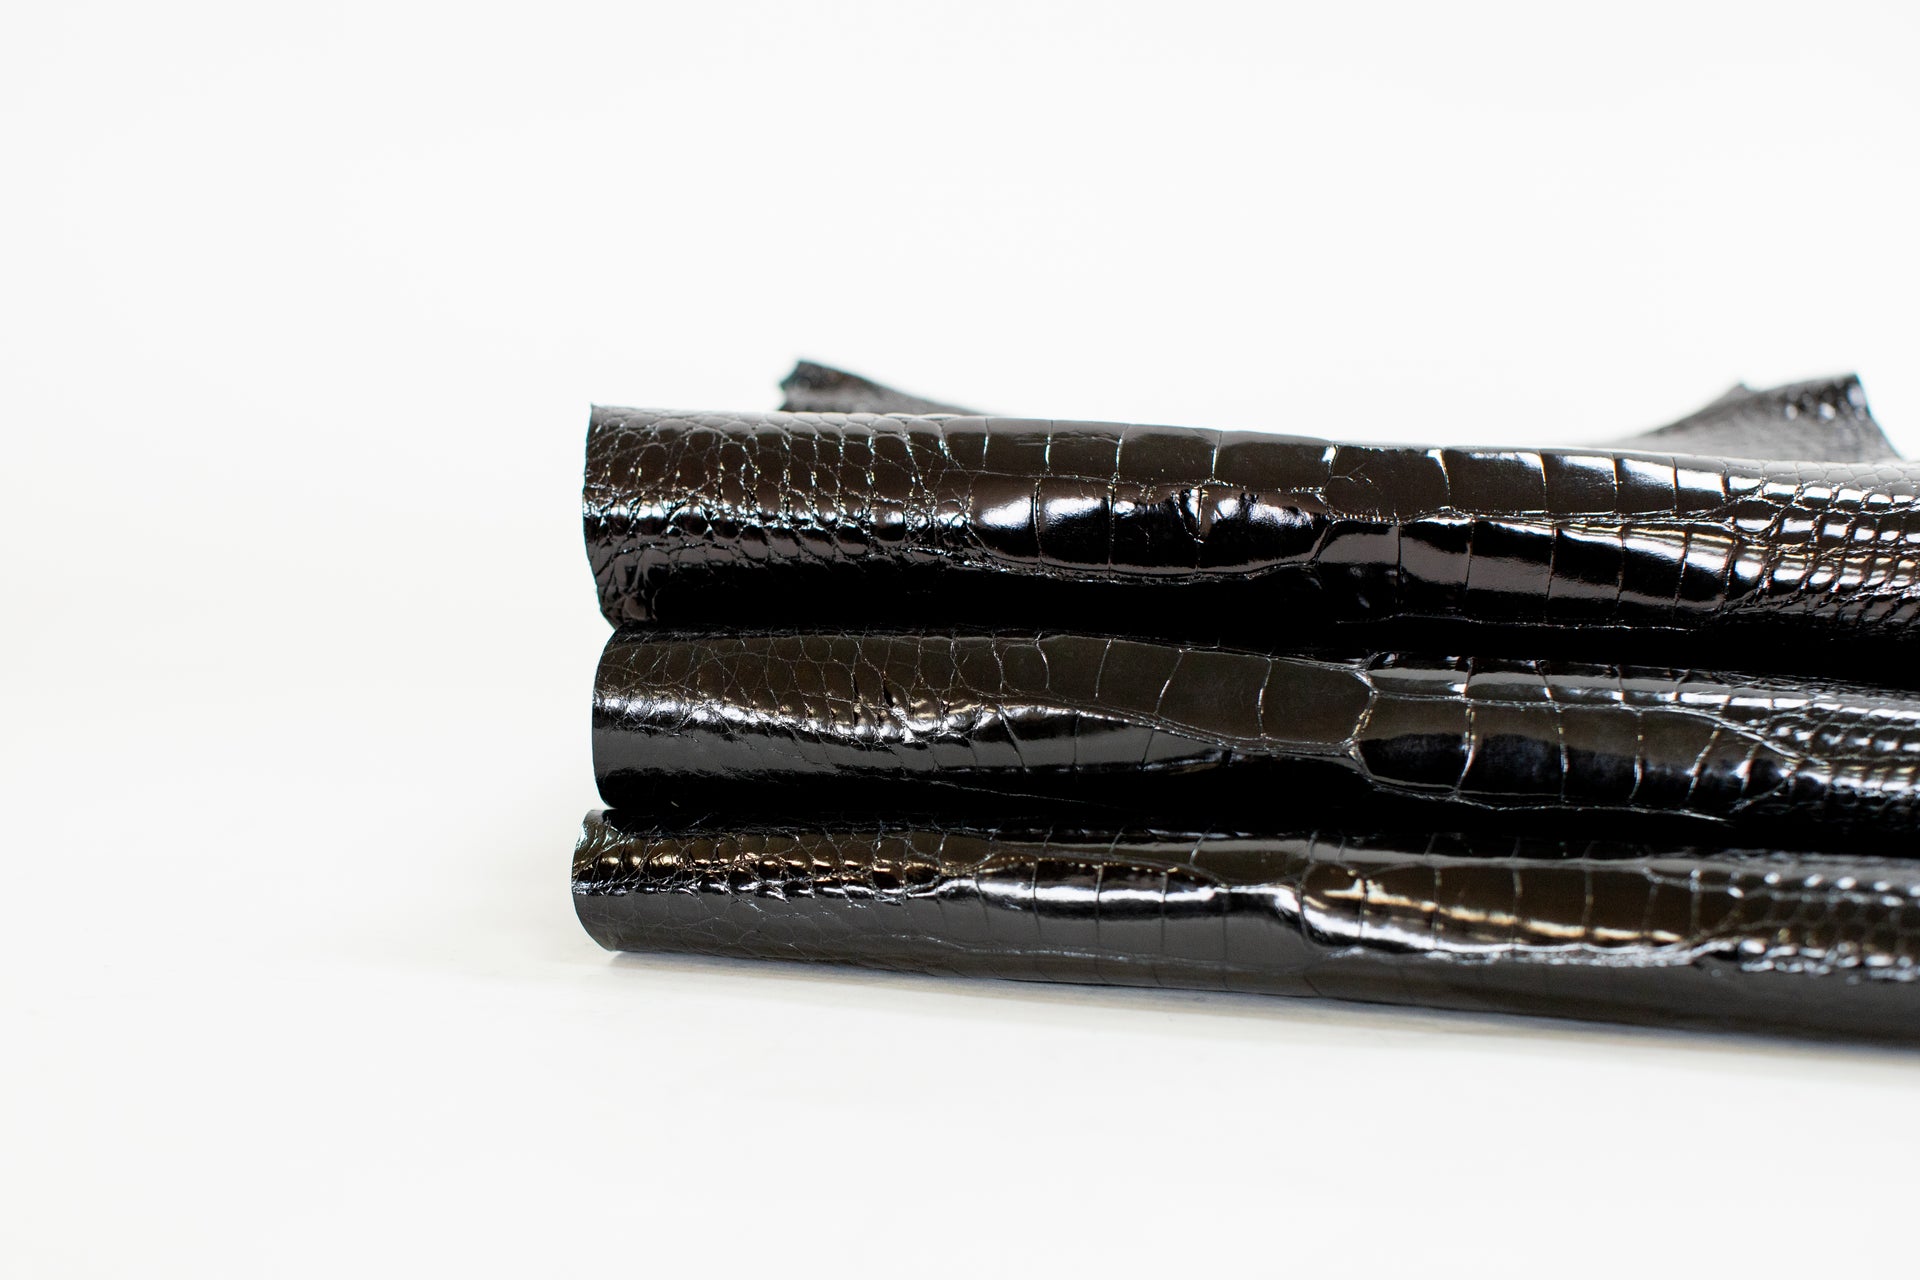 WITHOUT HOLES | 25-29 cm Grade 2/3 Black Glazed Wild American Alligator Belly Leather